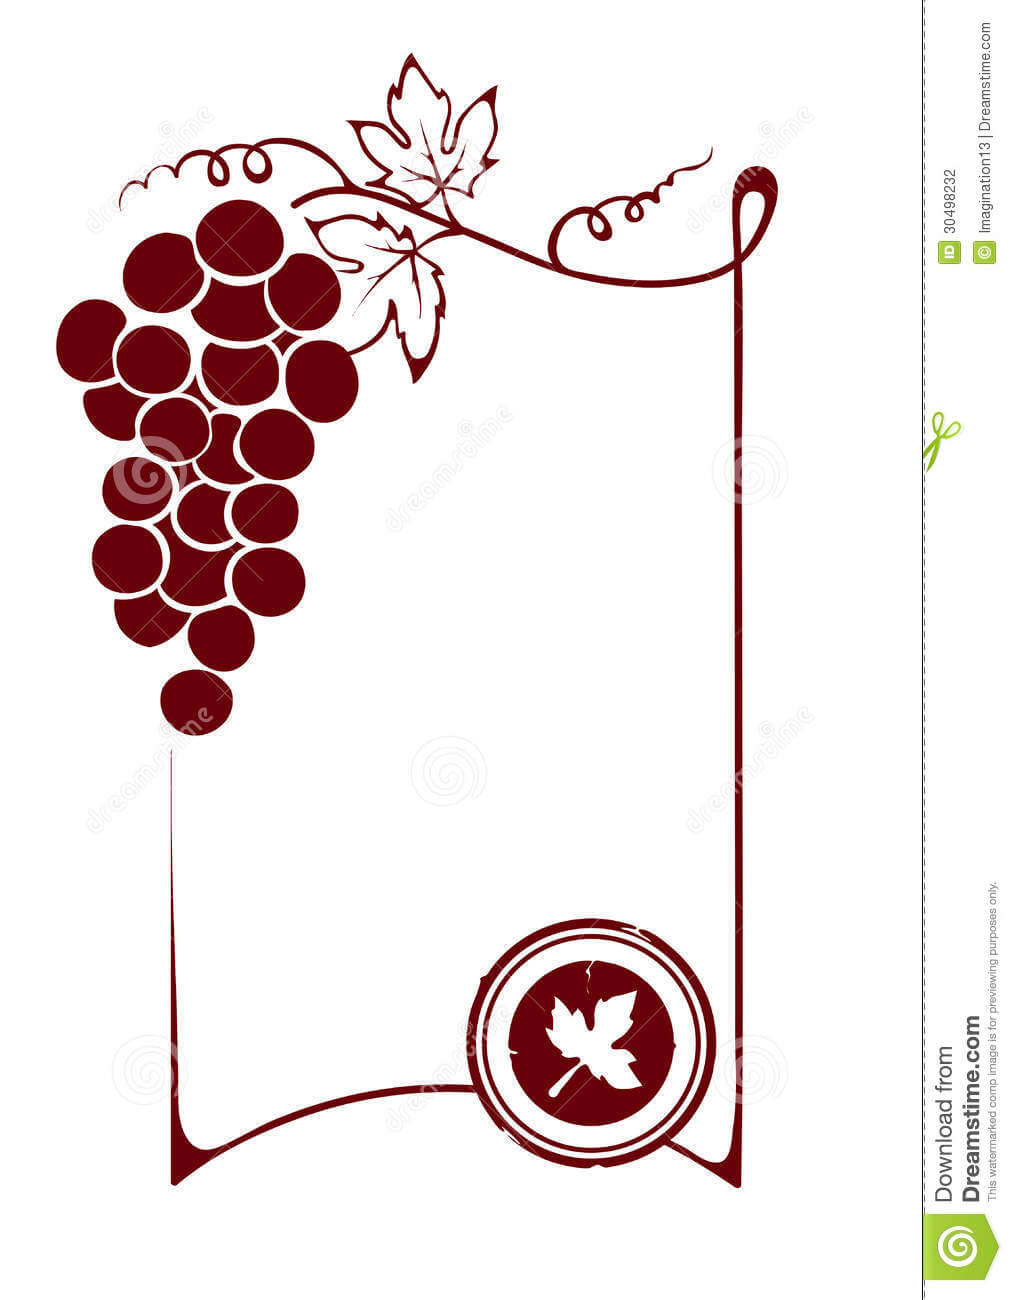 The Blank Wine Label Stock Vector. Illustration Of Decor Pertaining To Blank Wine Label Template